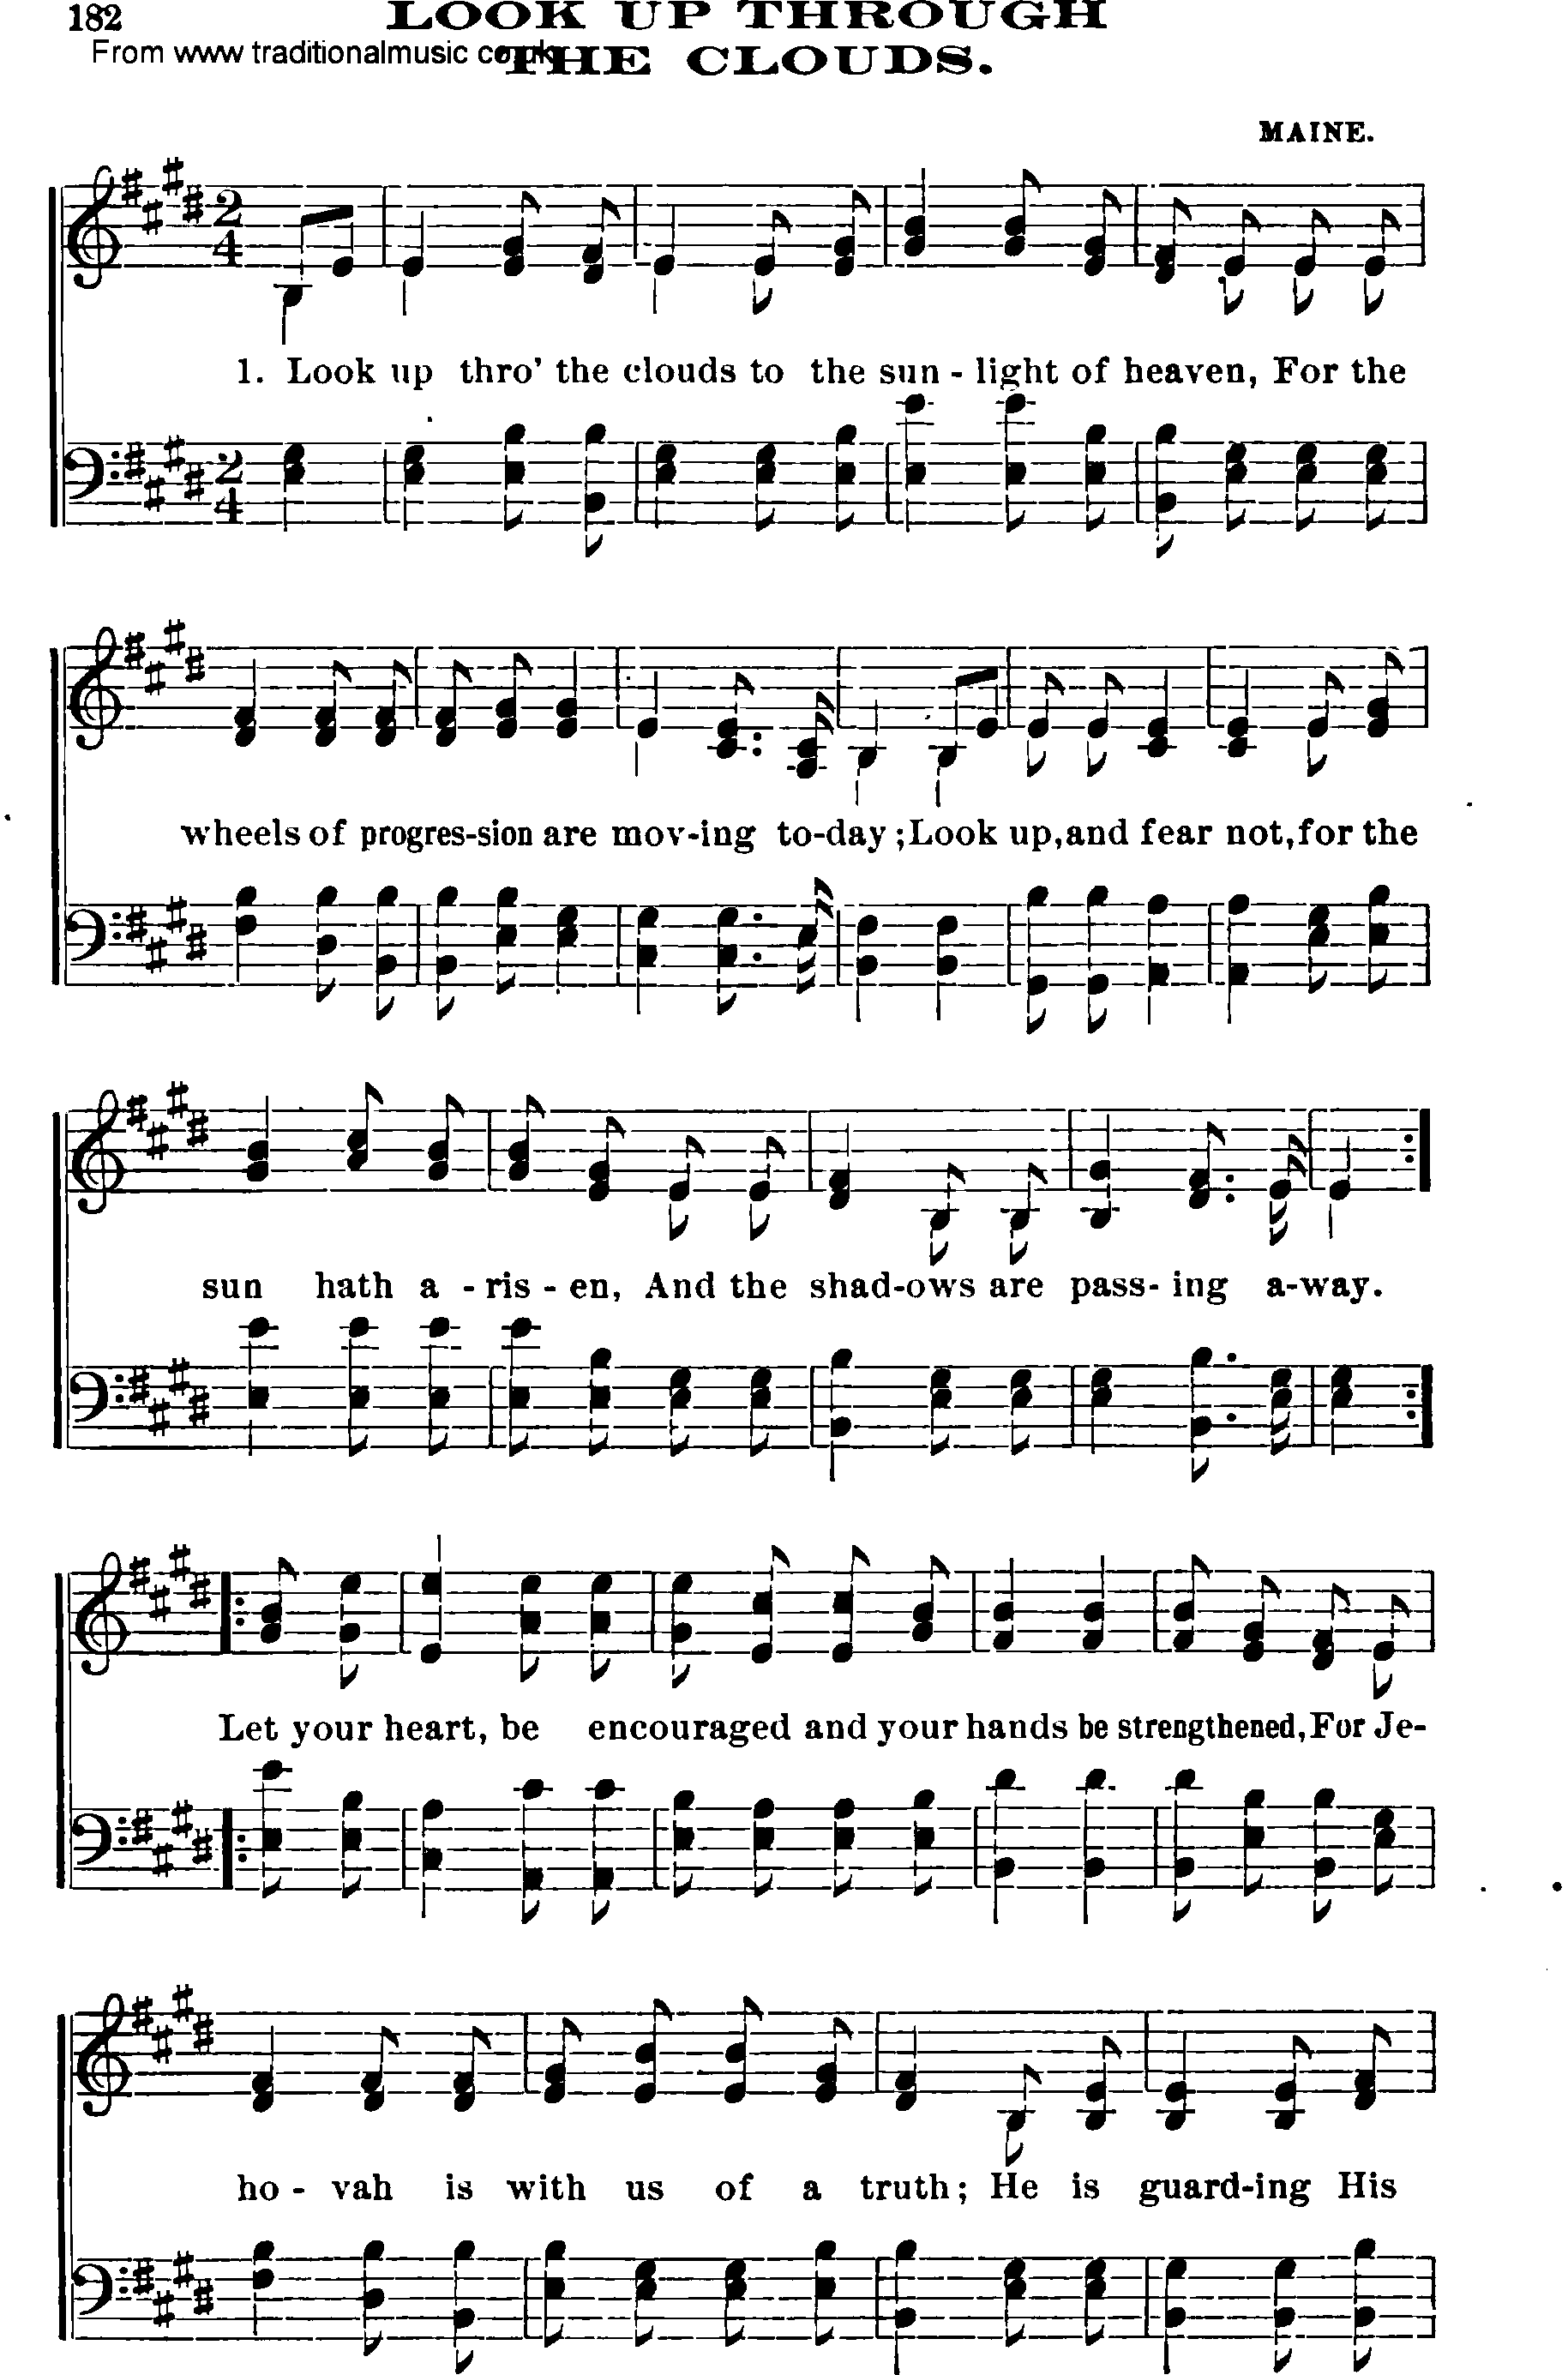 Shaker Music collection, Hymn: look up through the clouds, sheetmusic and PDF